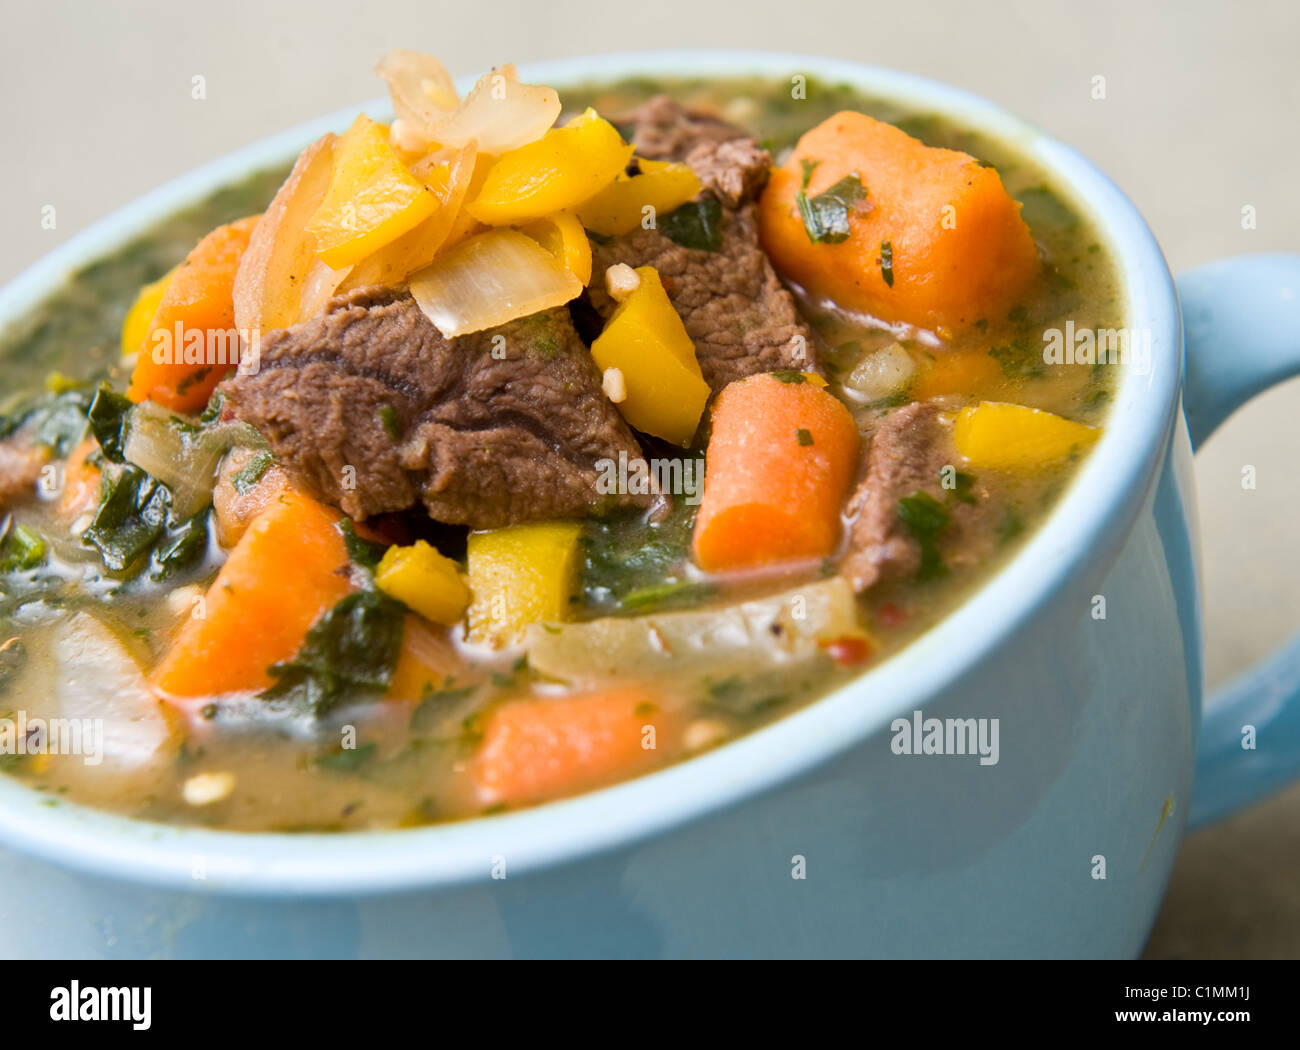 Soup bowl full of beef and vegetable stew Stock Photo